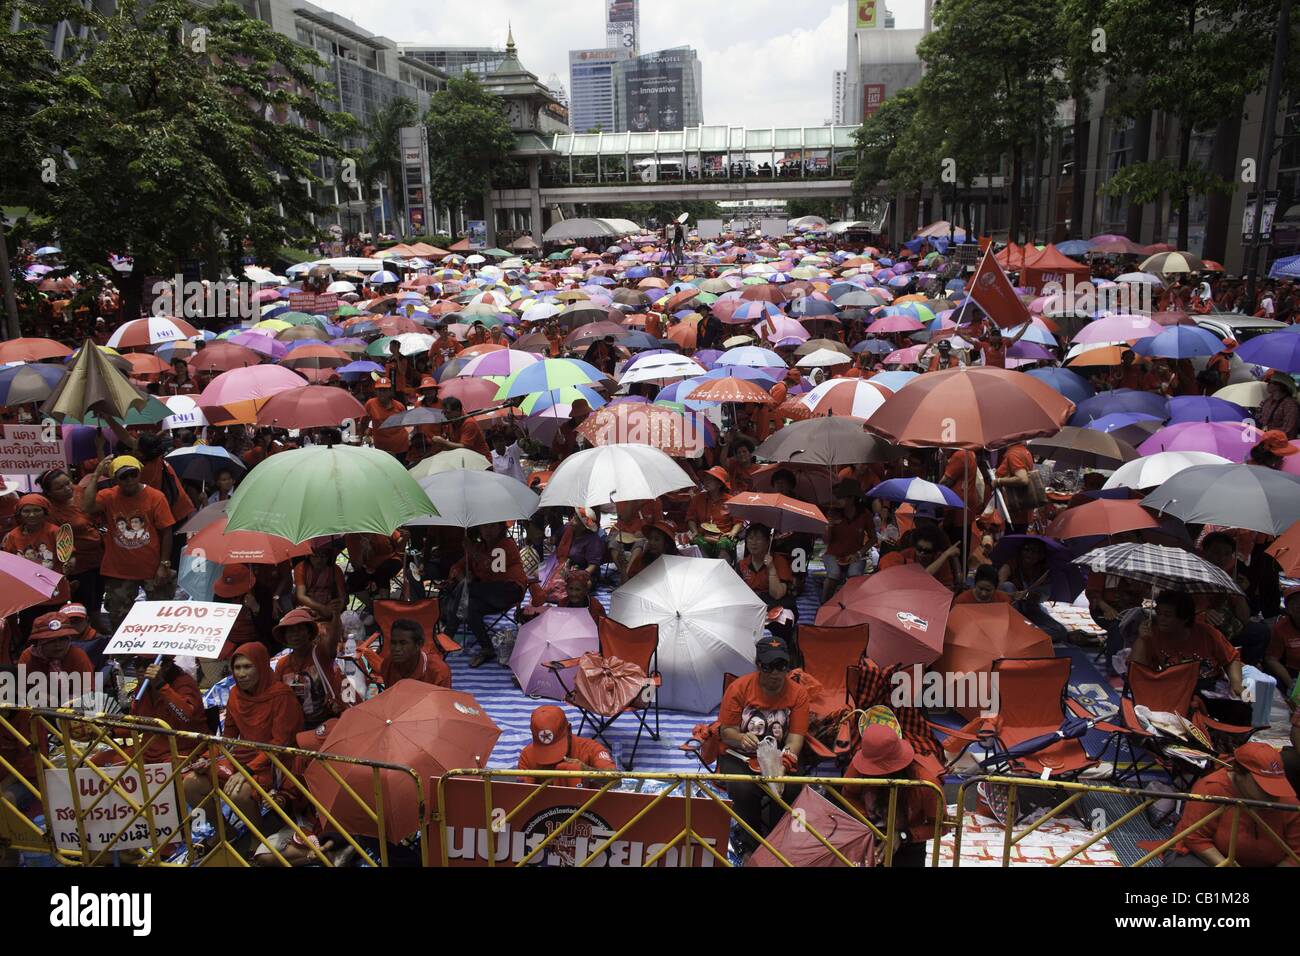 May 19, 2012 - Bangkok, Thailand - Thai Government supporters, known as ''Red Shirts'' gather on the streets of Bangkok outside the World Trade Center  during a rally Saturday, May 19, 2012 to remember those killed by Thai security forces two years earlier.  At least 92 people were killed during the Stock Photo